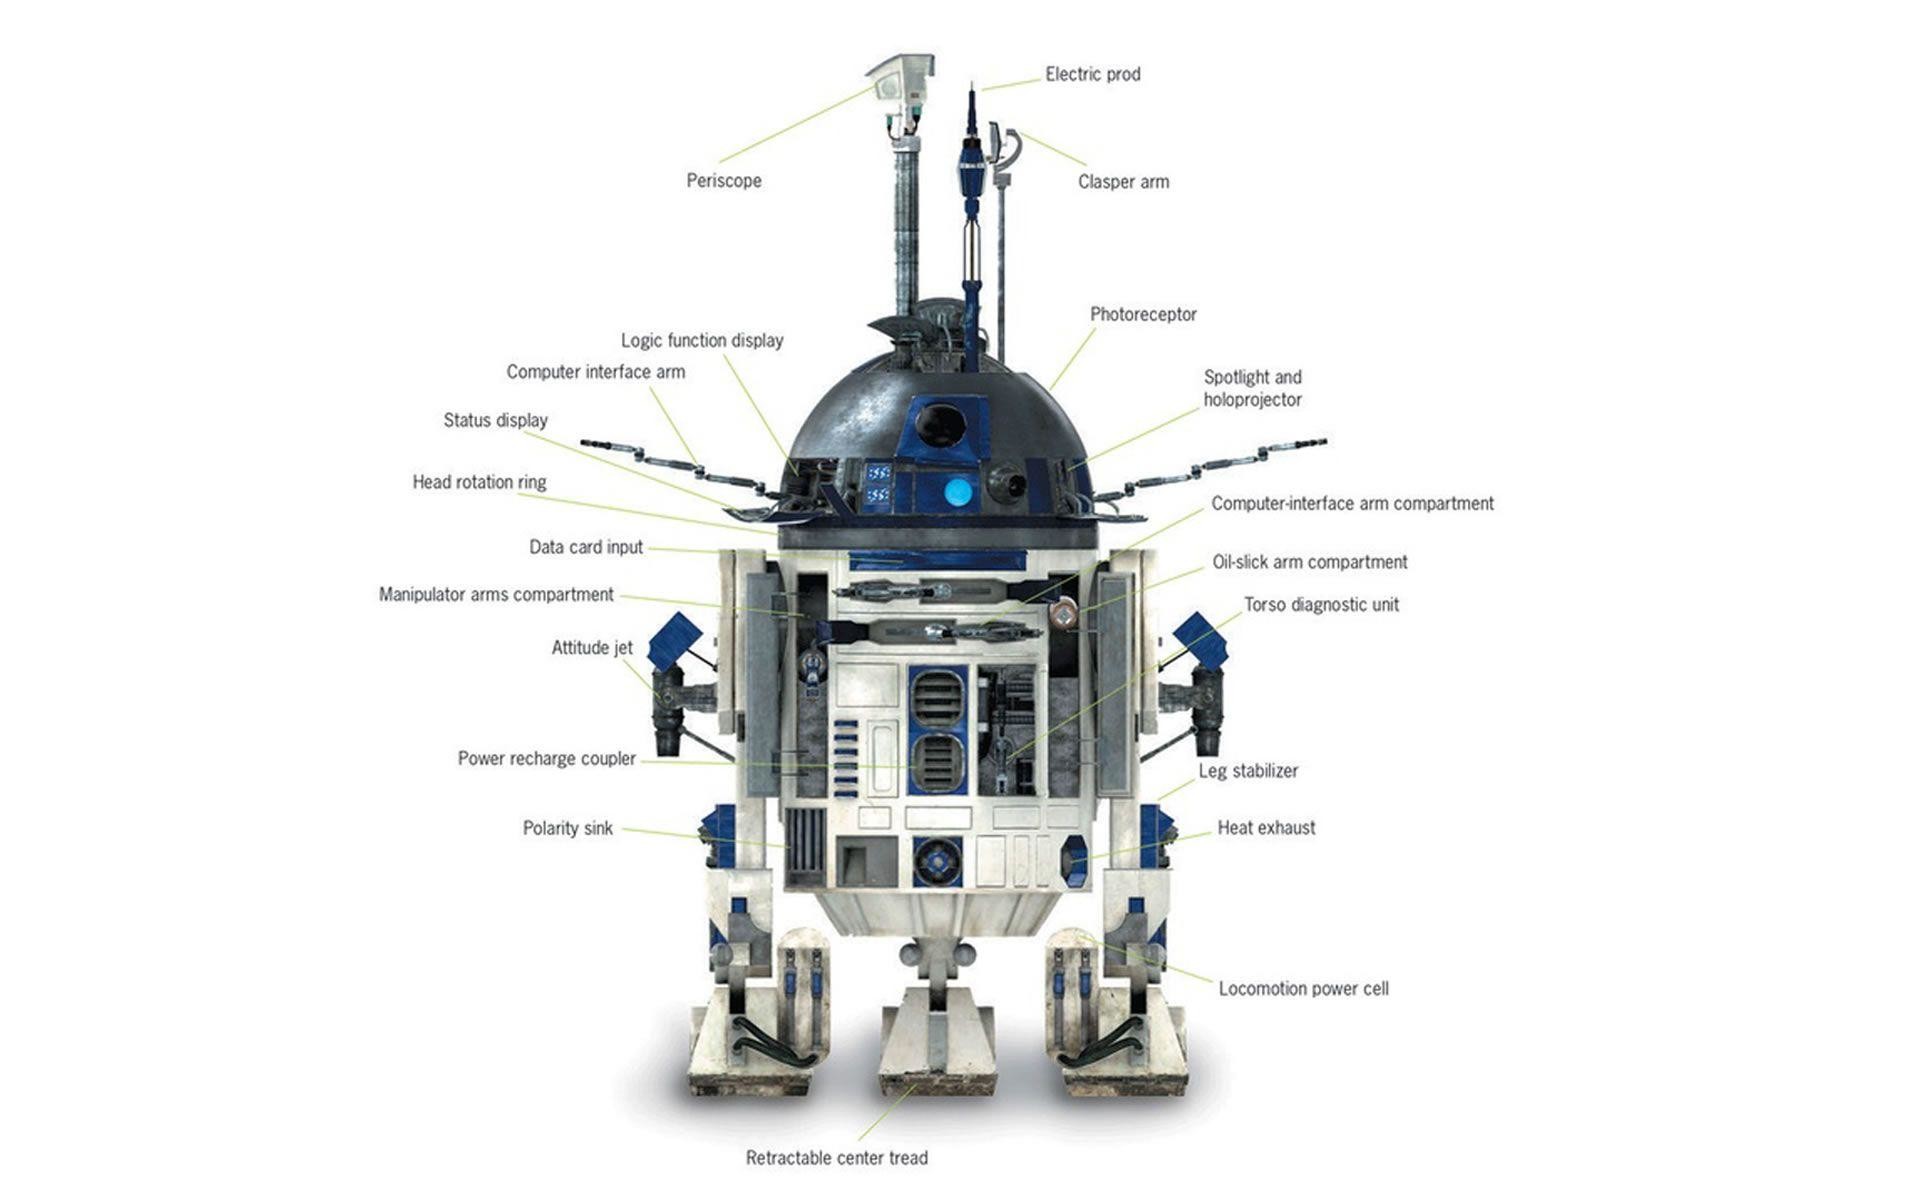 1920x1200 Related Pictures Star Wars R2d2 Iphone Hd Wallpaper Lowrider Car .